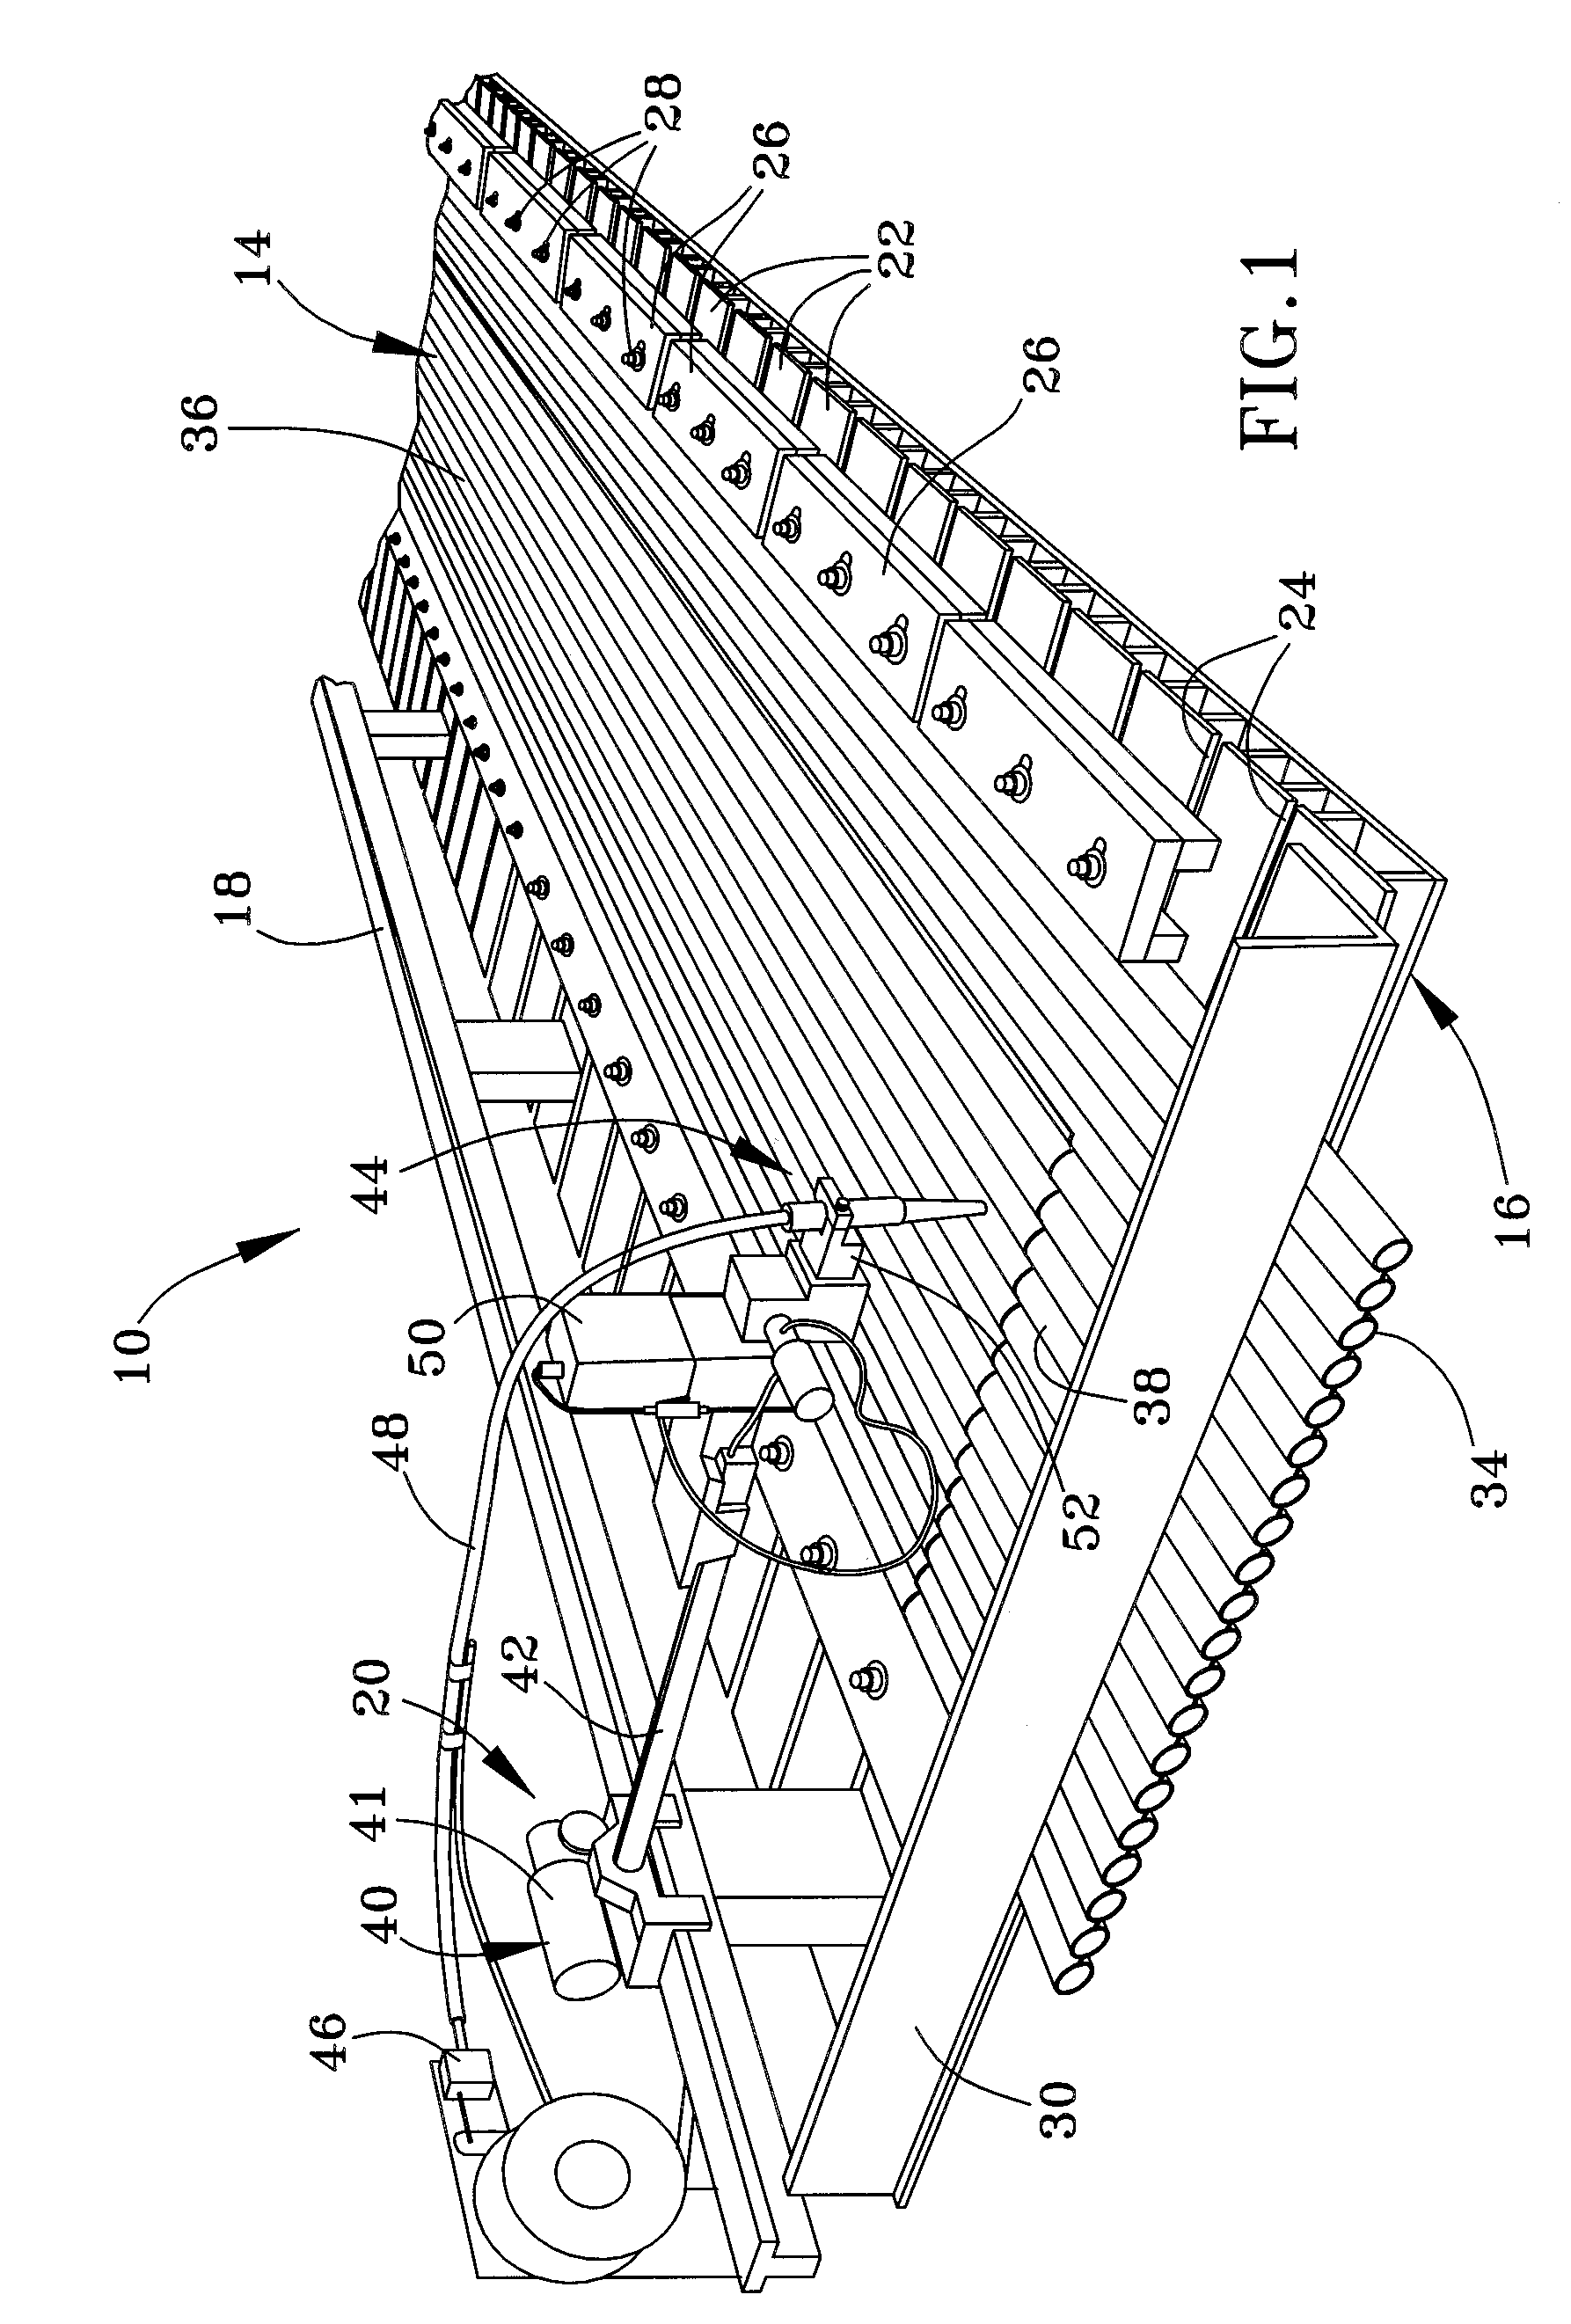 Process and apparatus for boiler tube panel welding and straightening